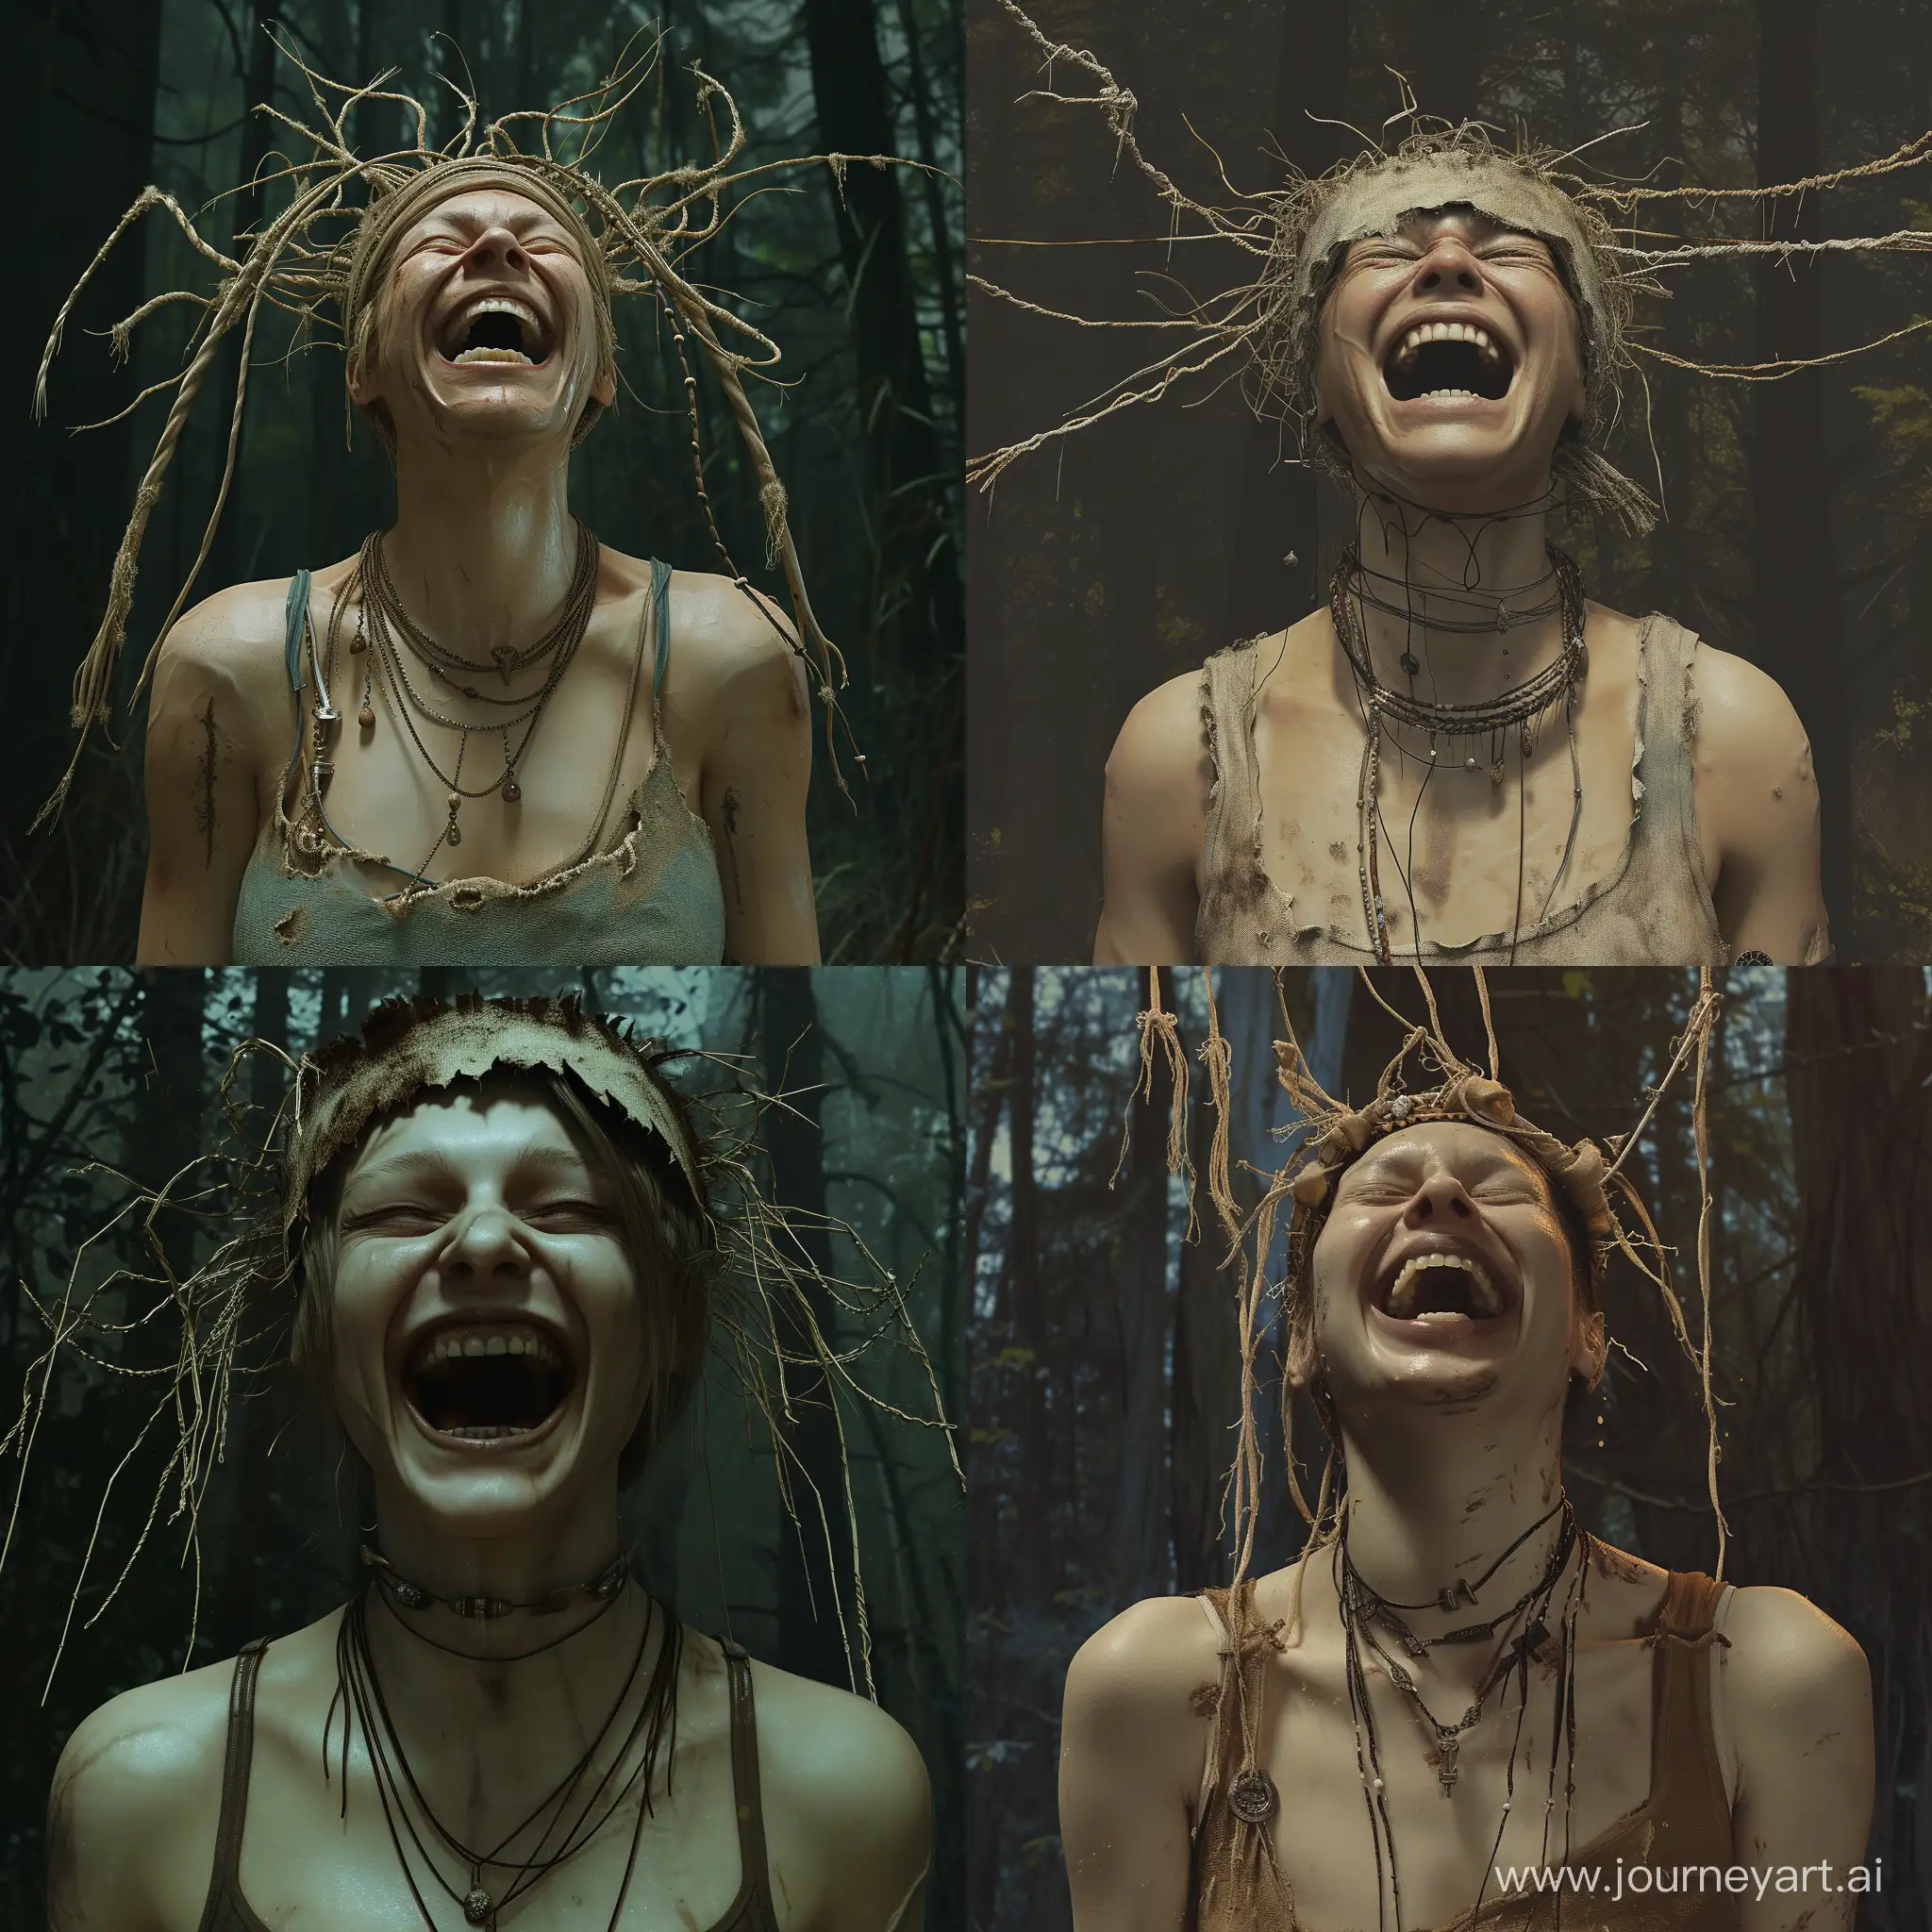 A realistic high detailed of a  woman Witch laughing crazy laugh, with strands sticking out around the headband. The background is a dark forest. The person's shoulders and upper chest are visible  wearing a tank top or similar garment with thin straps. There are some necklaces around the person’s neck, adding detail to the otherwise simple presentation
